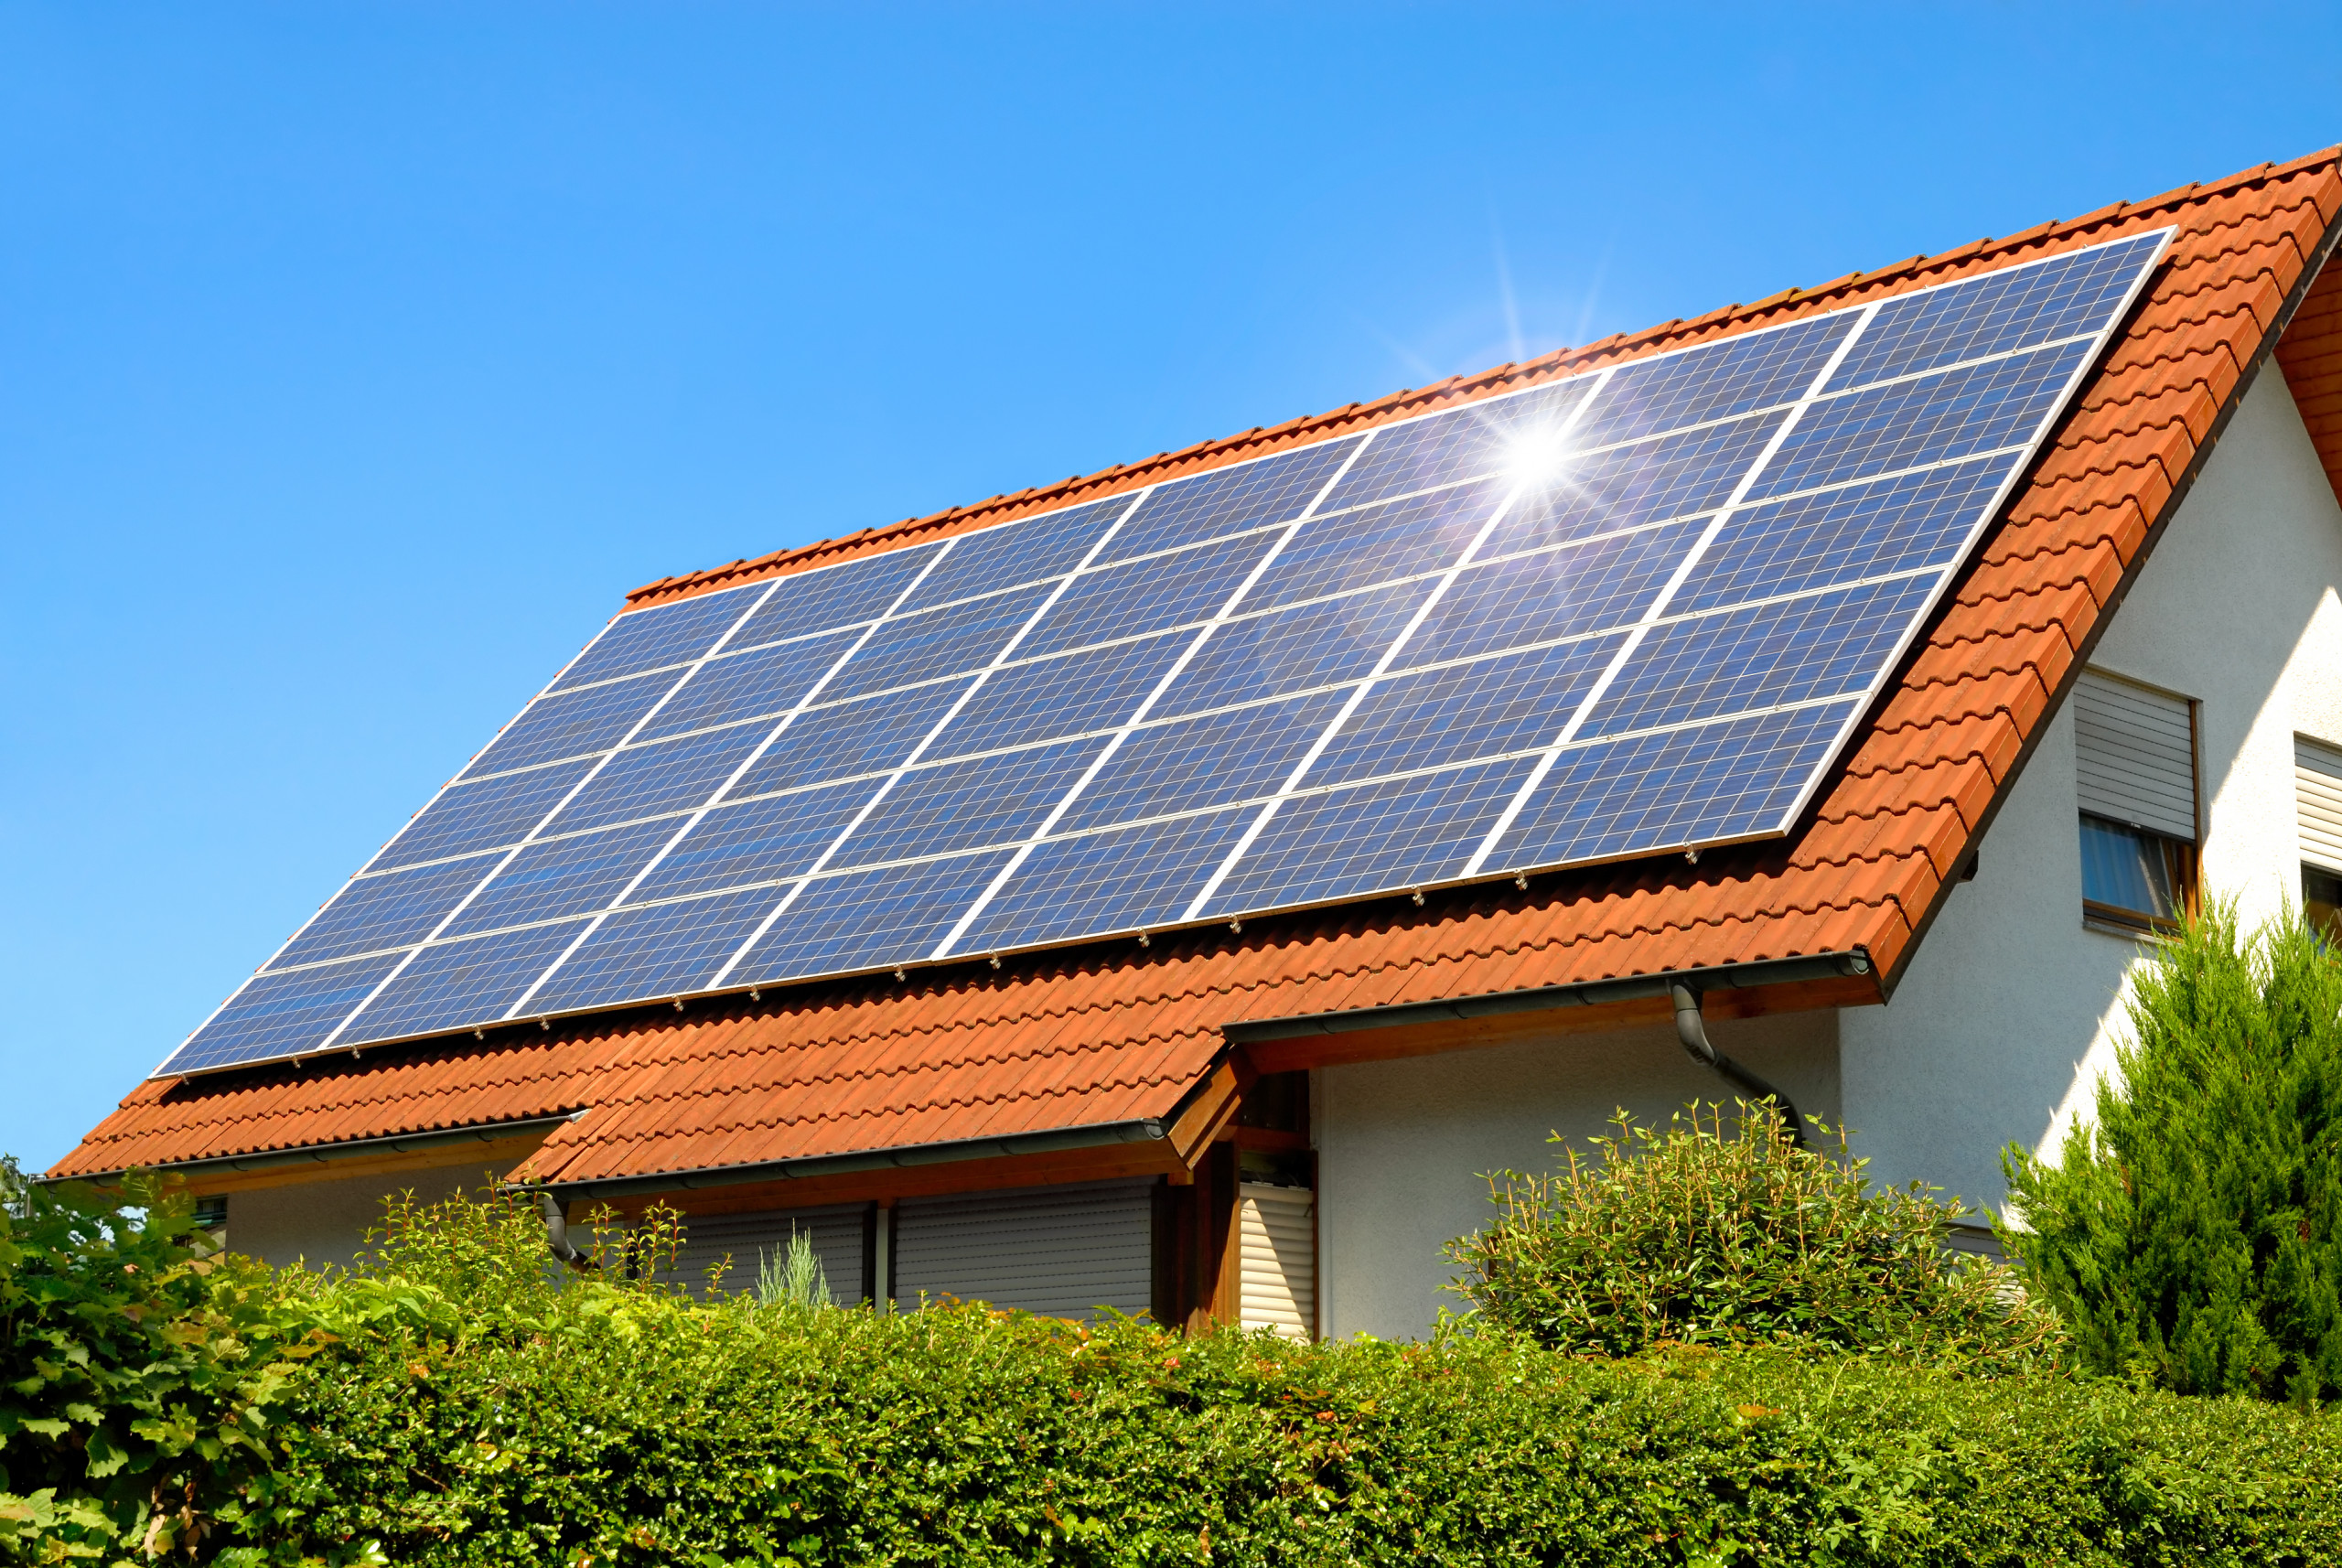 Reinstallation of Solar Photovoltaic (PV) Systems